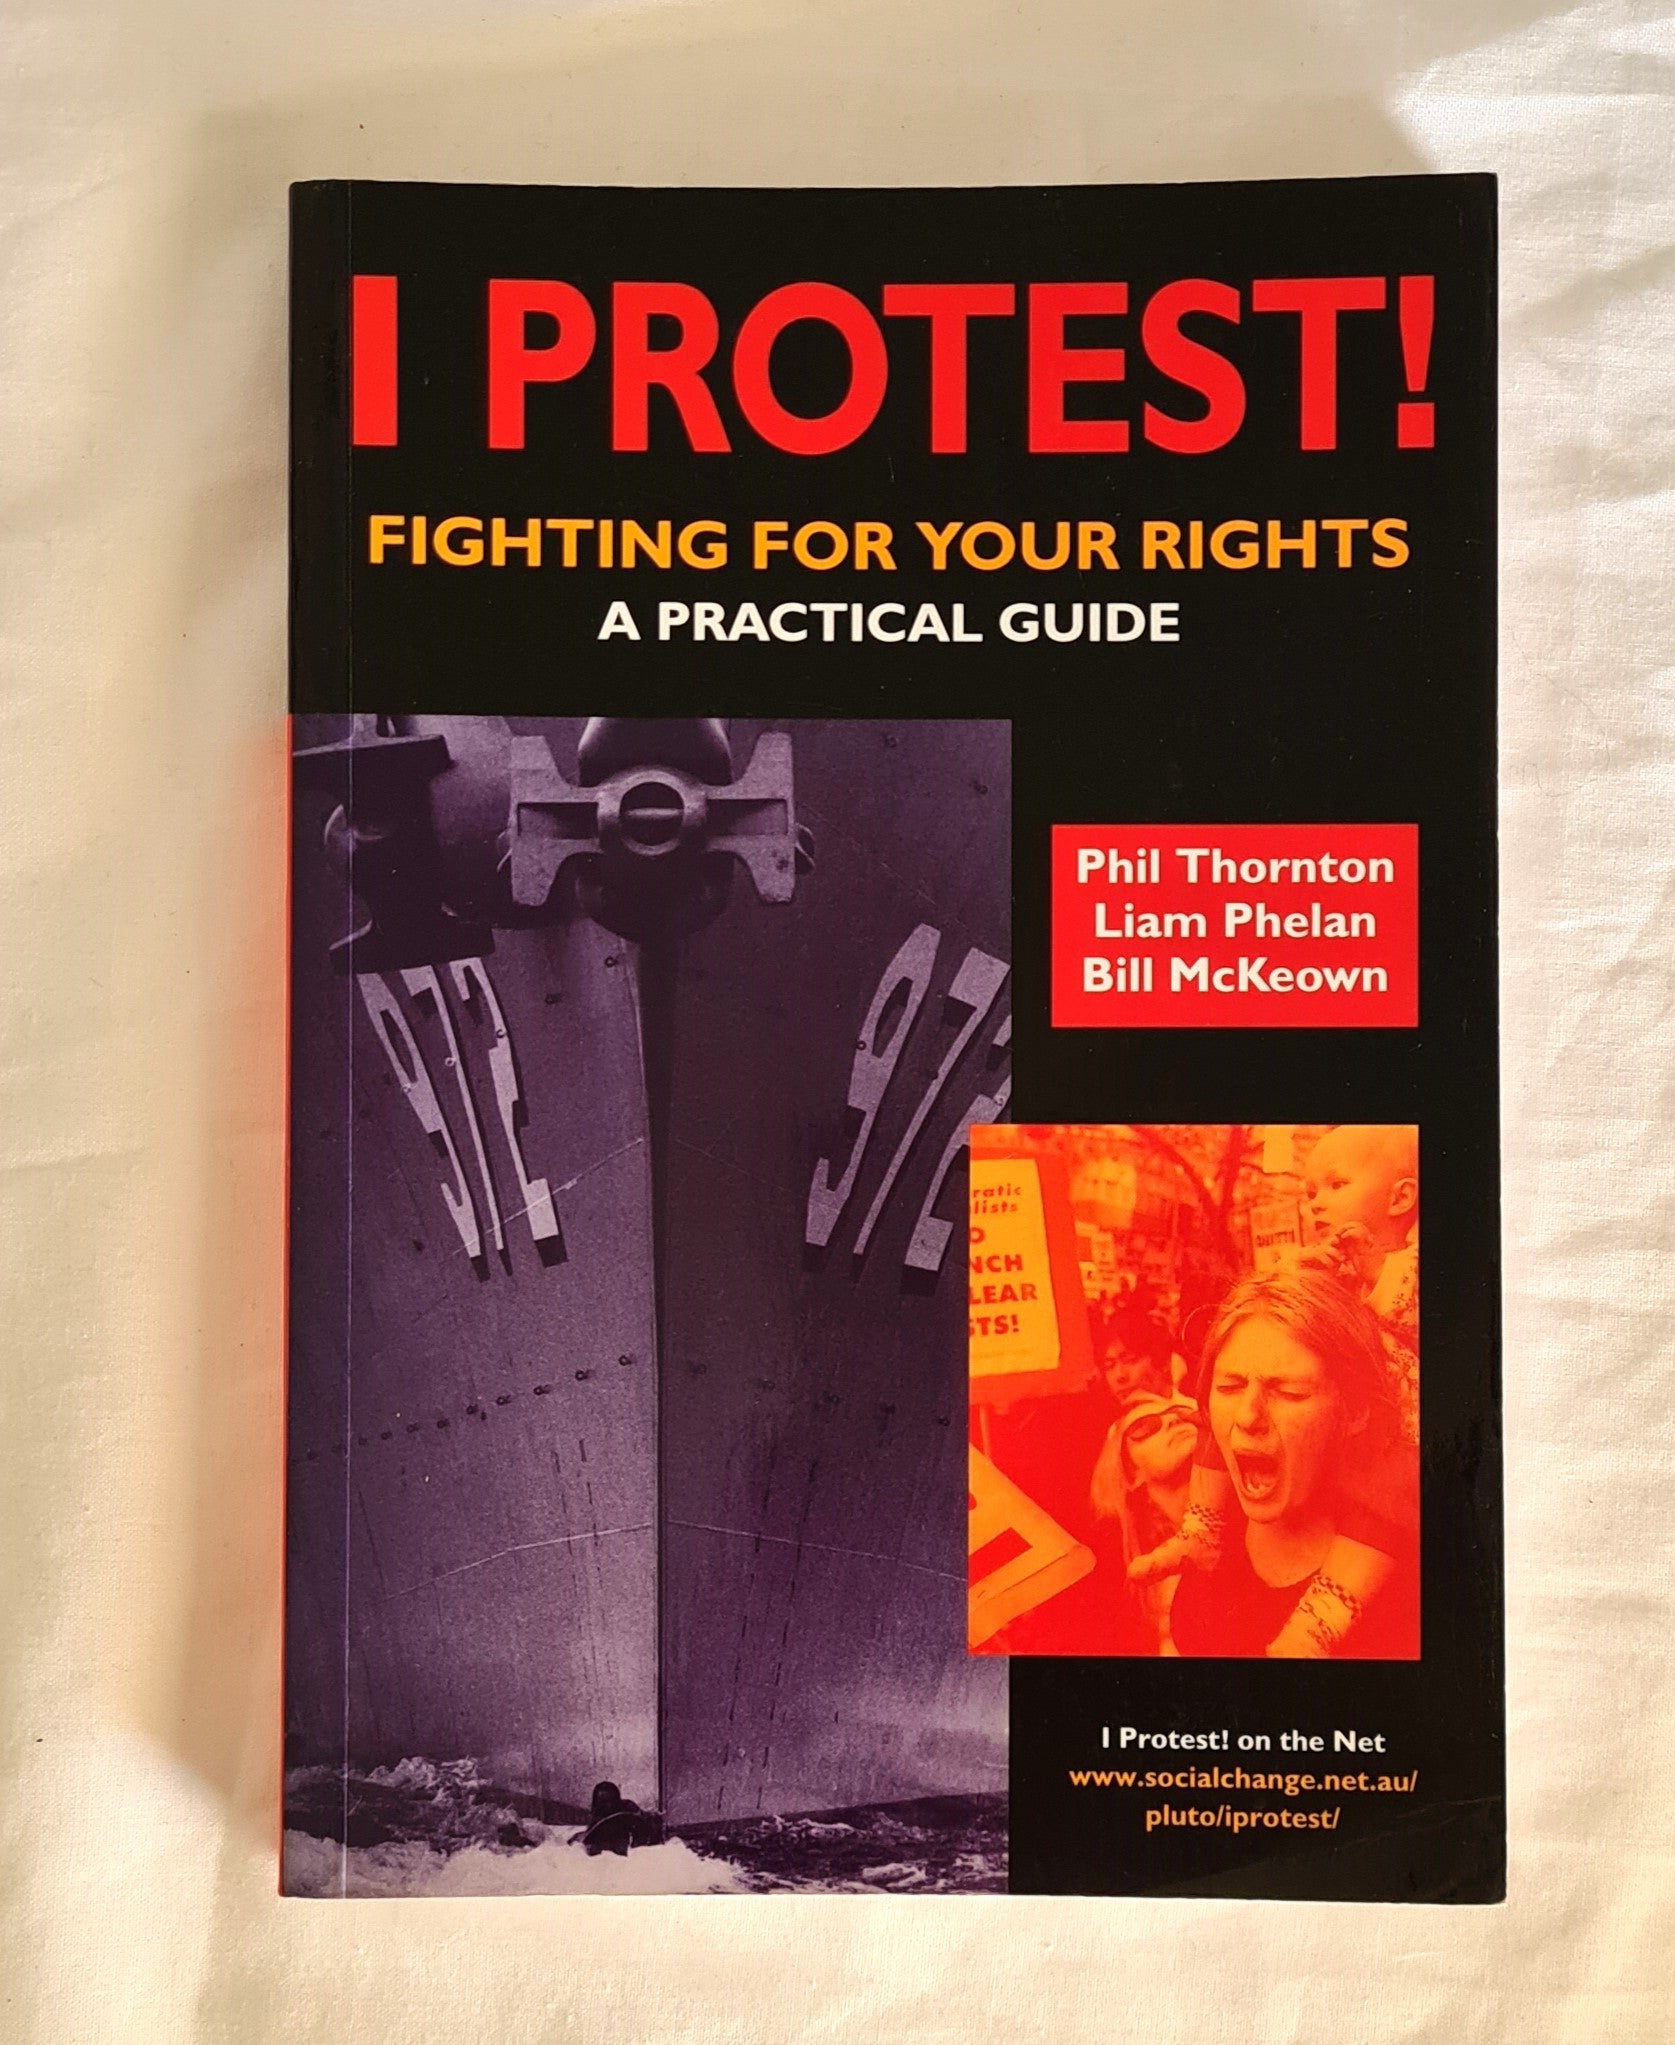 I Protest  Fighting for Your Rights  A Practical Guide  by Phil Thornton, Liam Phelan, Bill McKeown